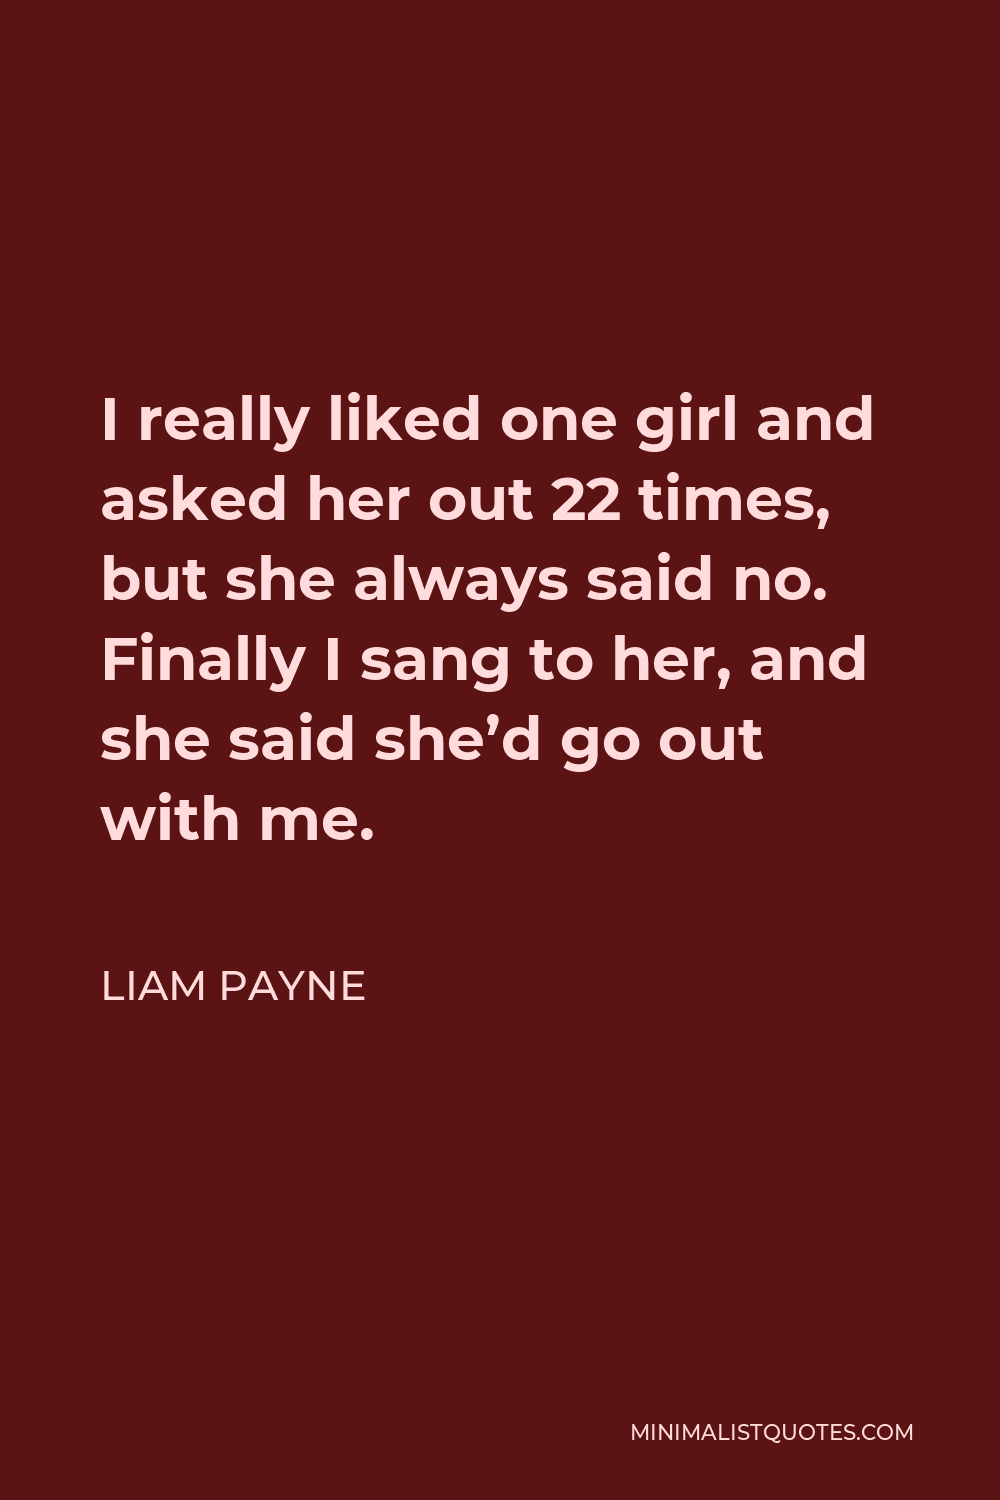 Liam Payne Quote - I really liked one girl and asked her out 22 times, but she always said no. Finally I sang to her, and she said she’d go out with me.